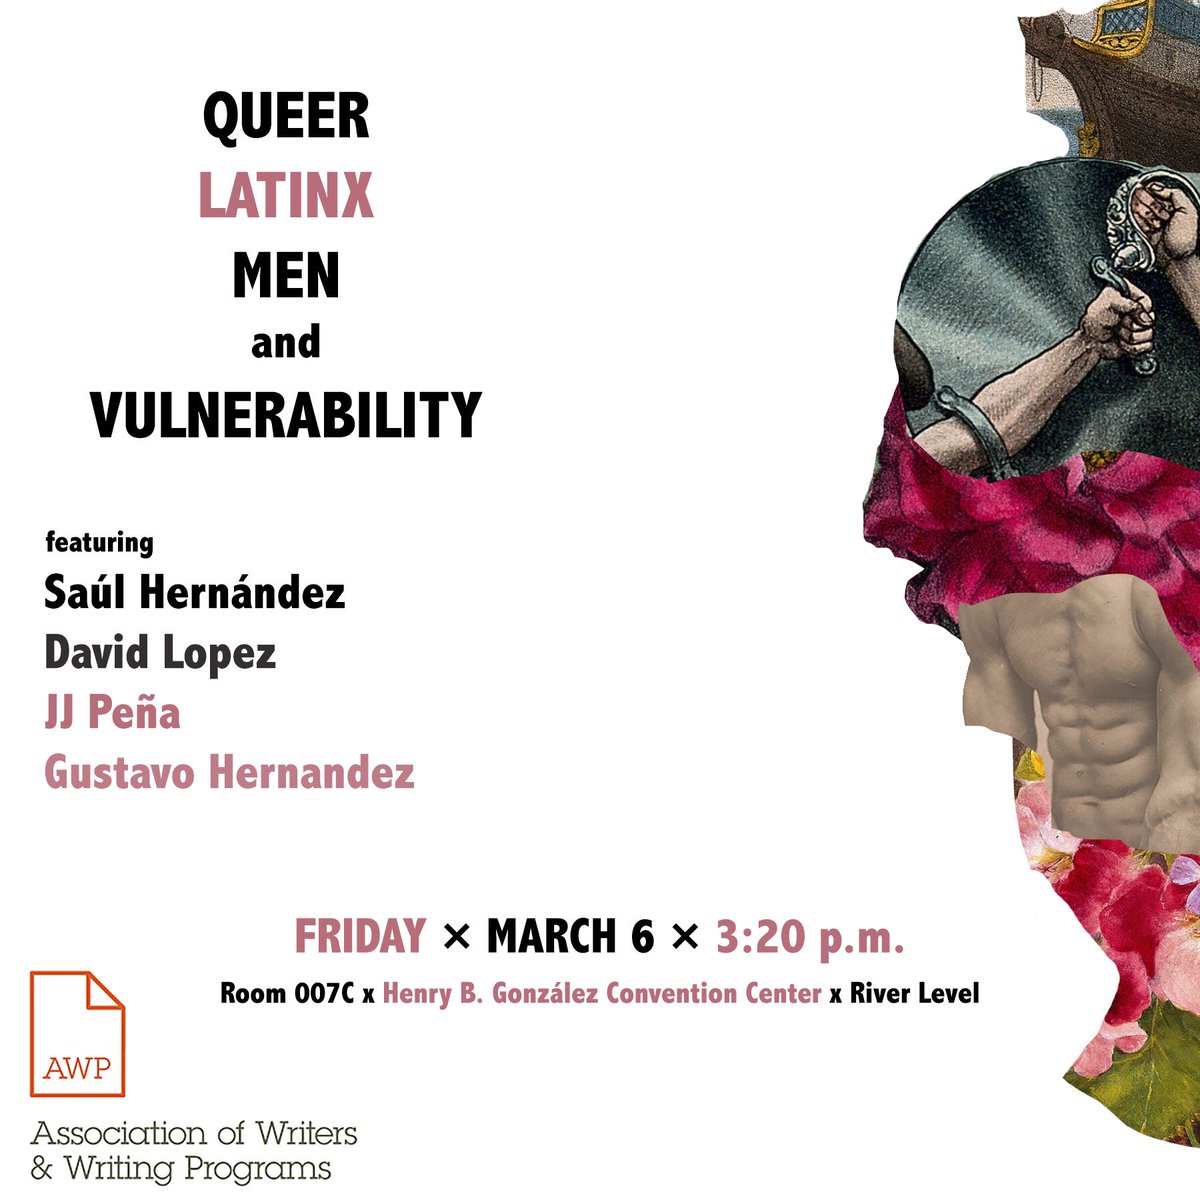 Ready for @awpwriter! Check us out at #awp20 @GloomyGlus @el_saulhdez #awp2020 #queer #latinx #queervoices